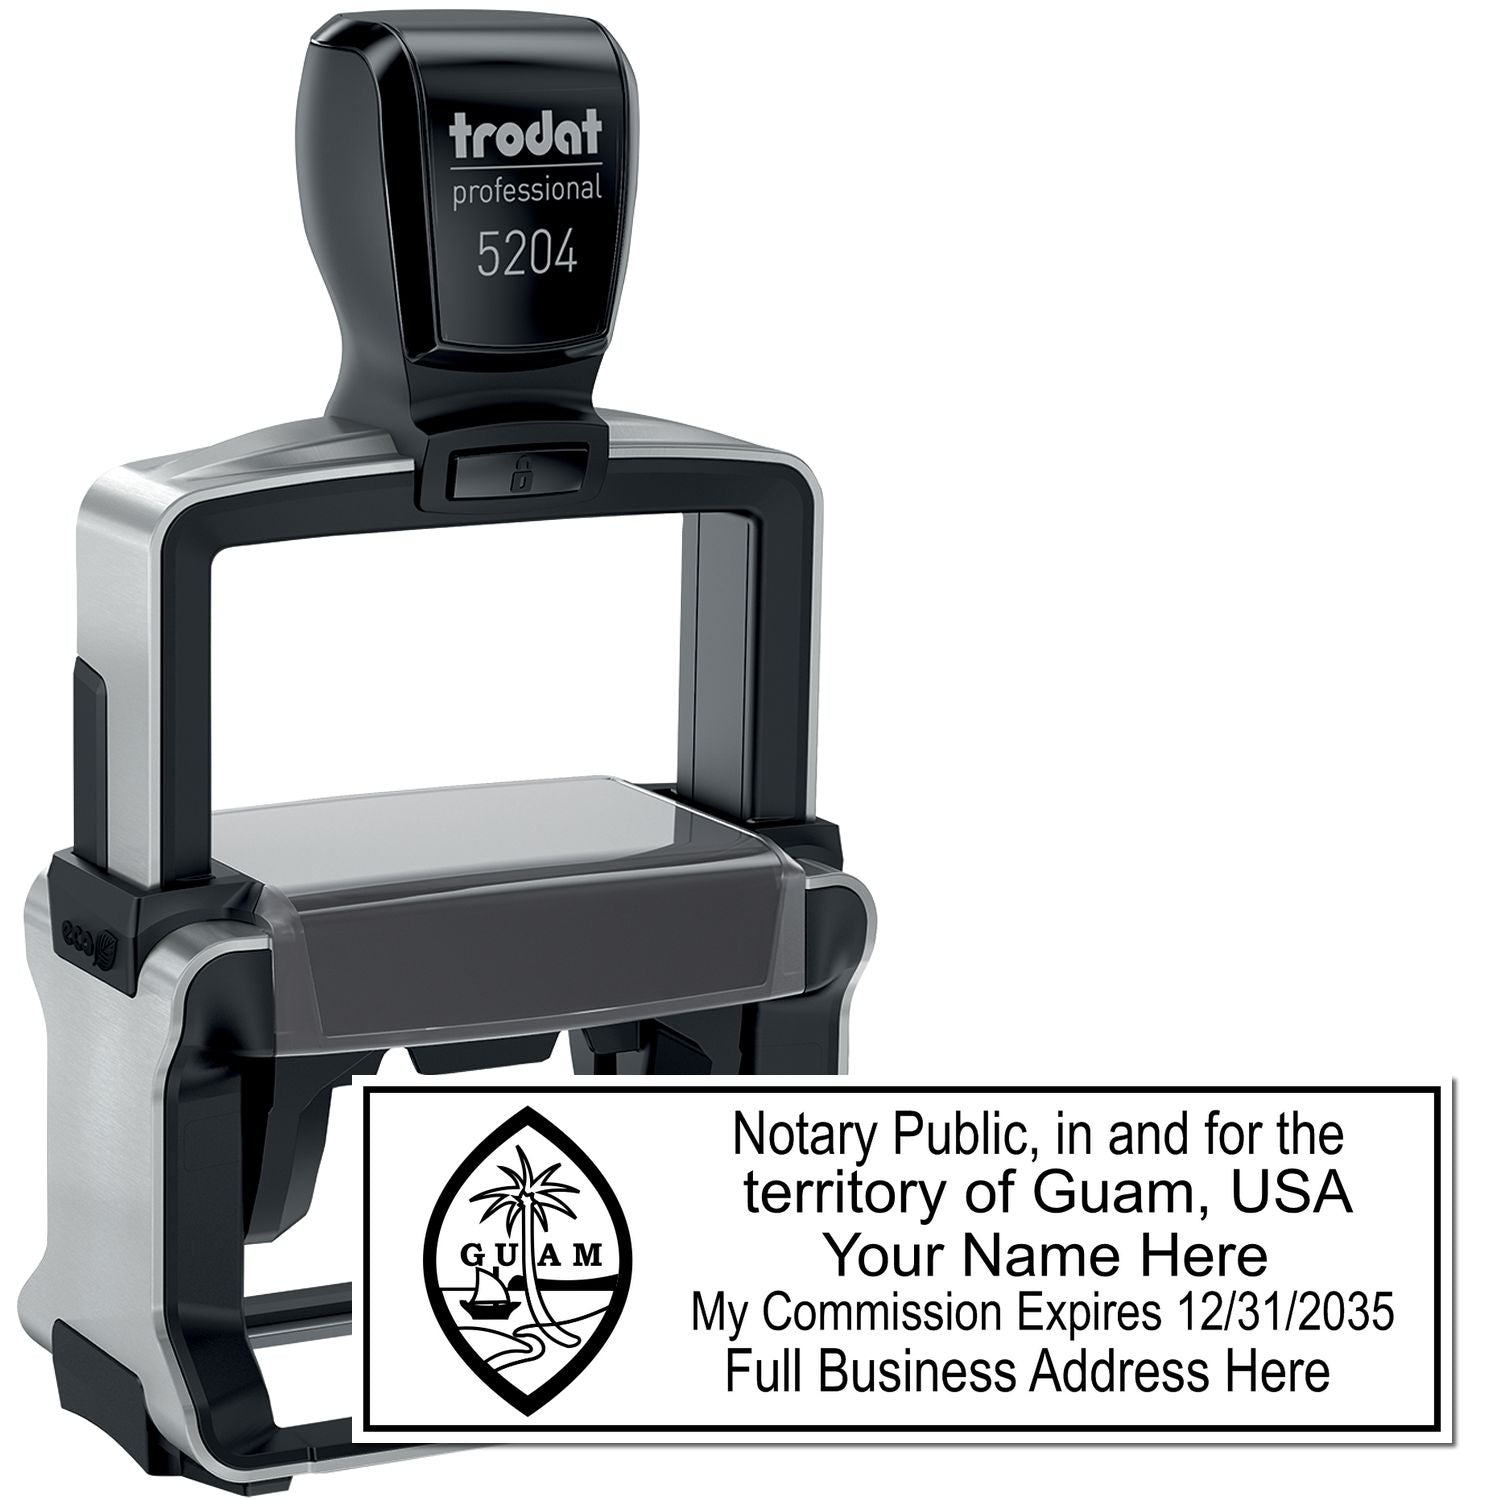 The main image for the Heavy-Duty Guam Rectangular Notary Stamp depicting a sample of the imprint and electronic files